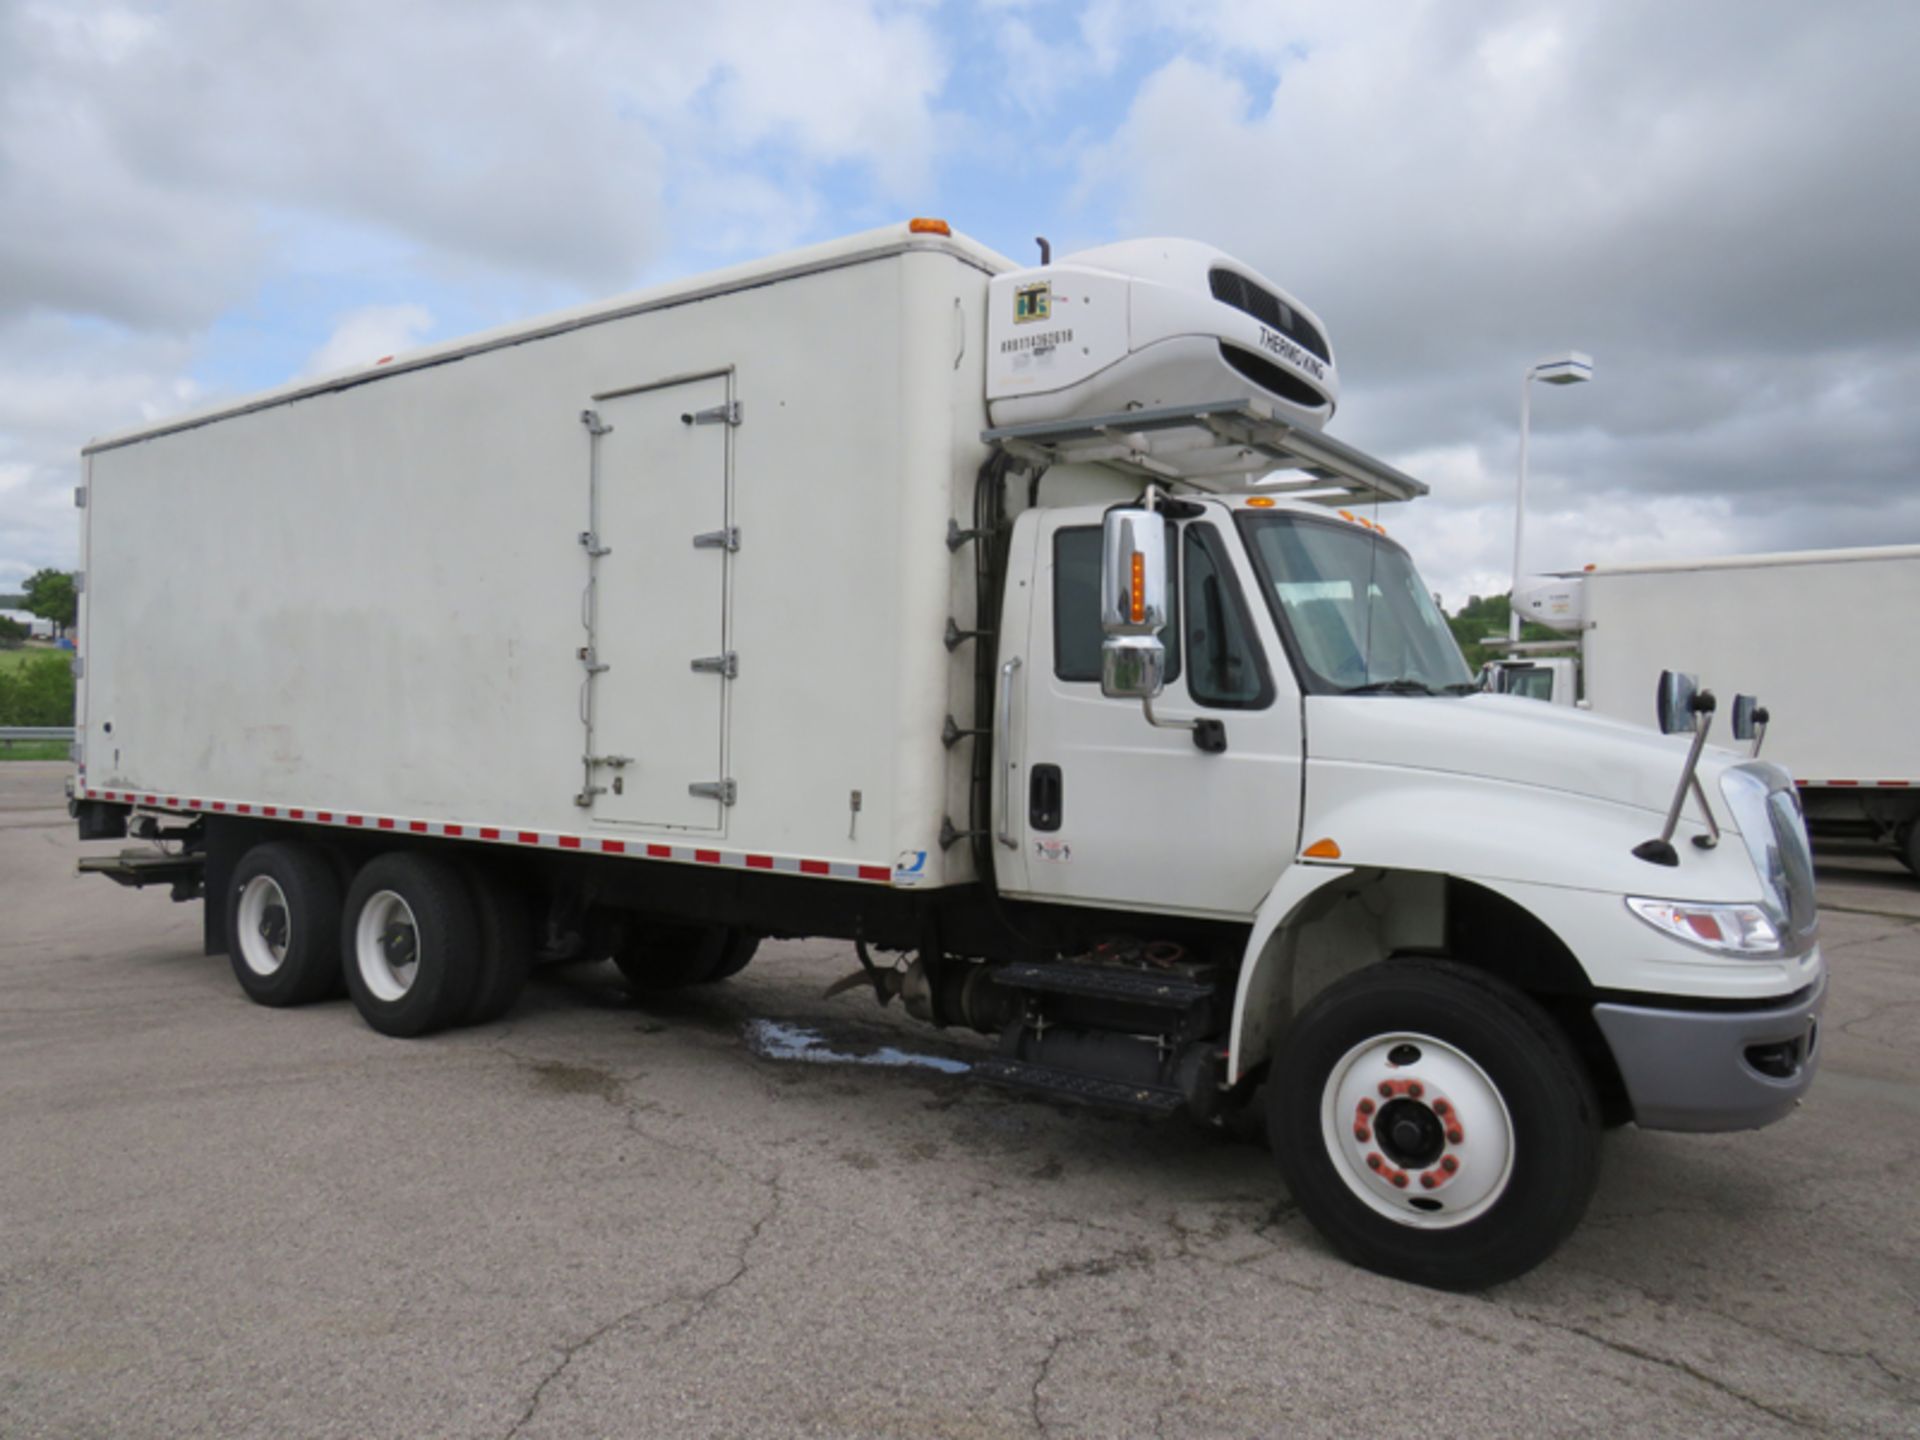 2018 INTERNATIONAL 4400 SBA 6X4 REFRIGERATED BOX TRUCK VIN#: 1HTMSTAR1JH529764, Approx Miles: 42060, - Image 3 of 9